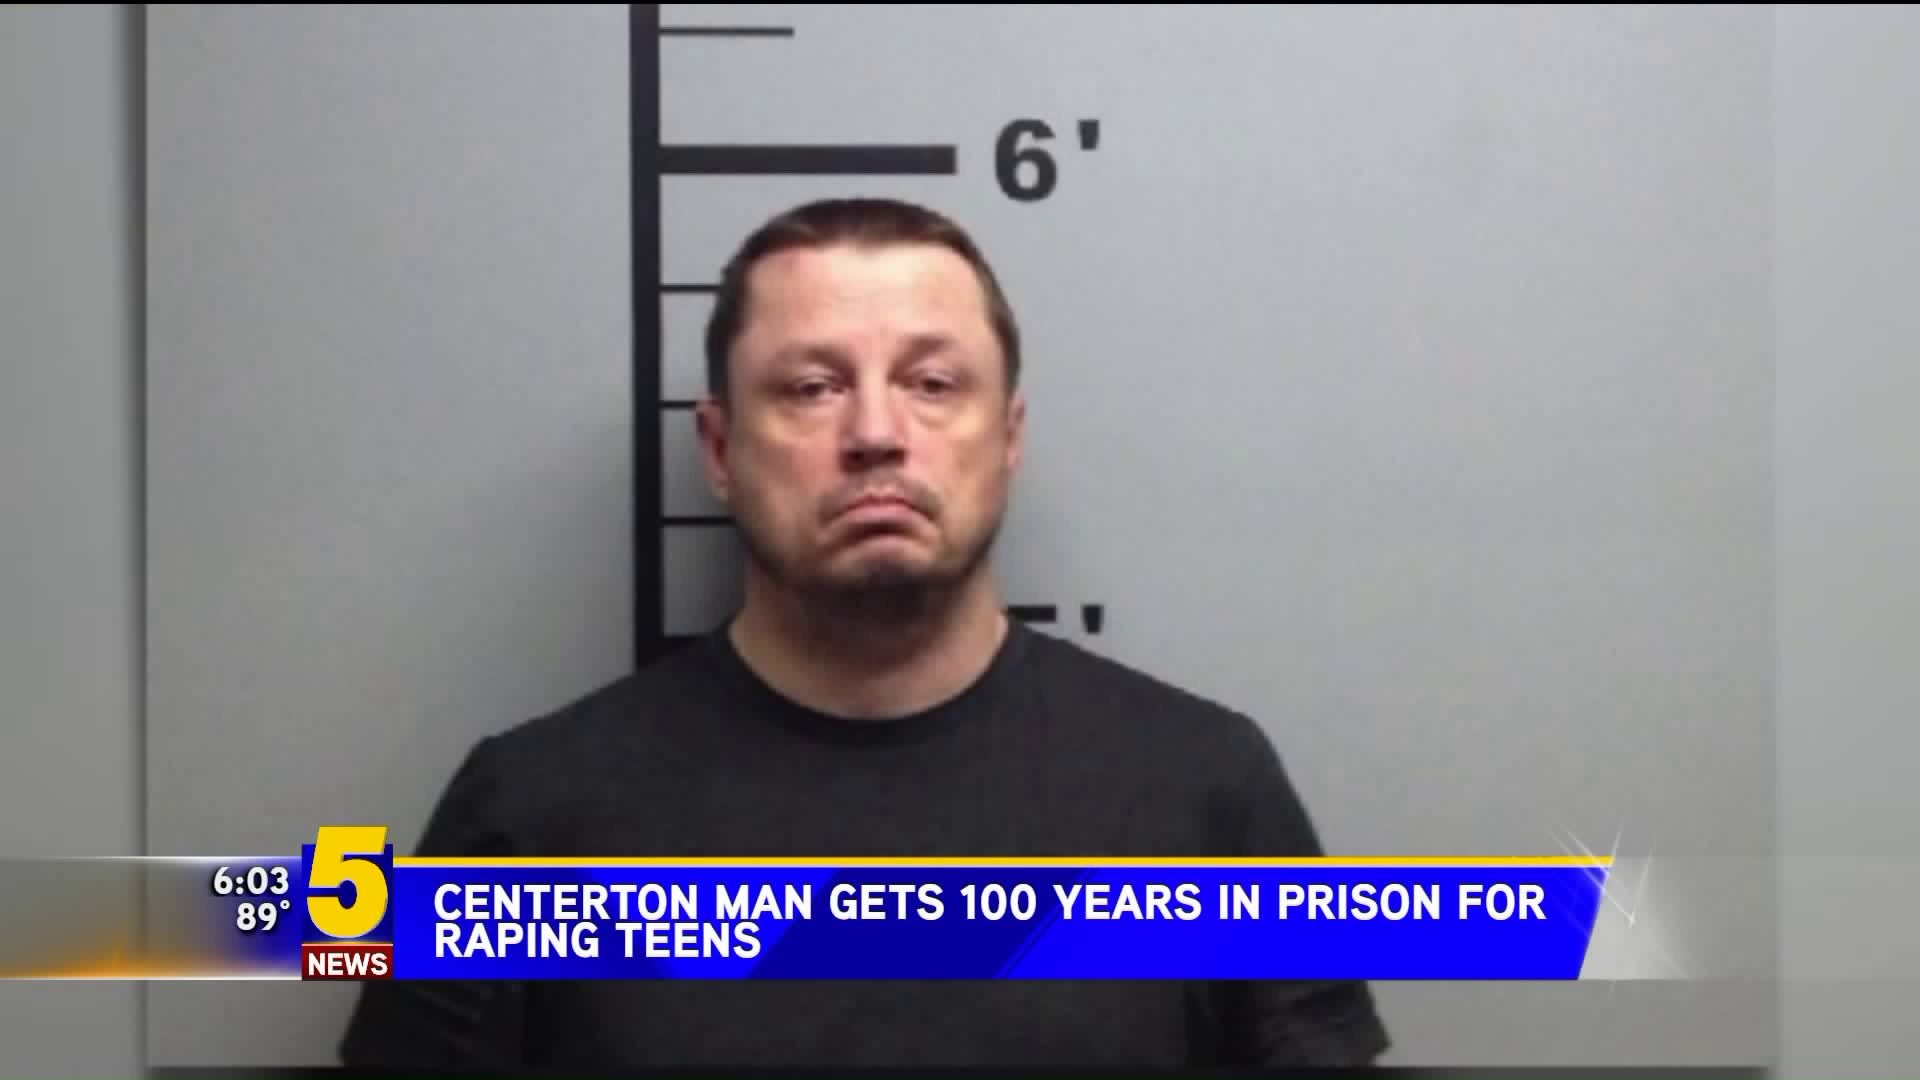 Centerton Man Gets 100 Years In Prison For Raping Teeens